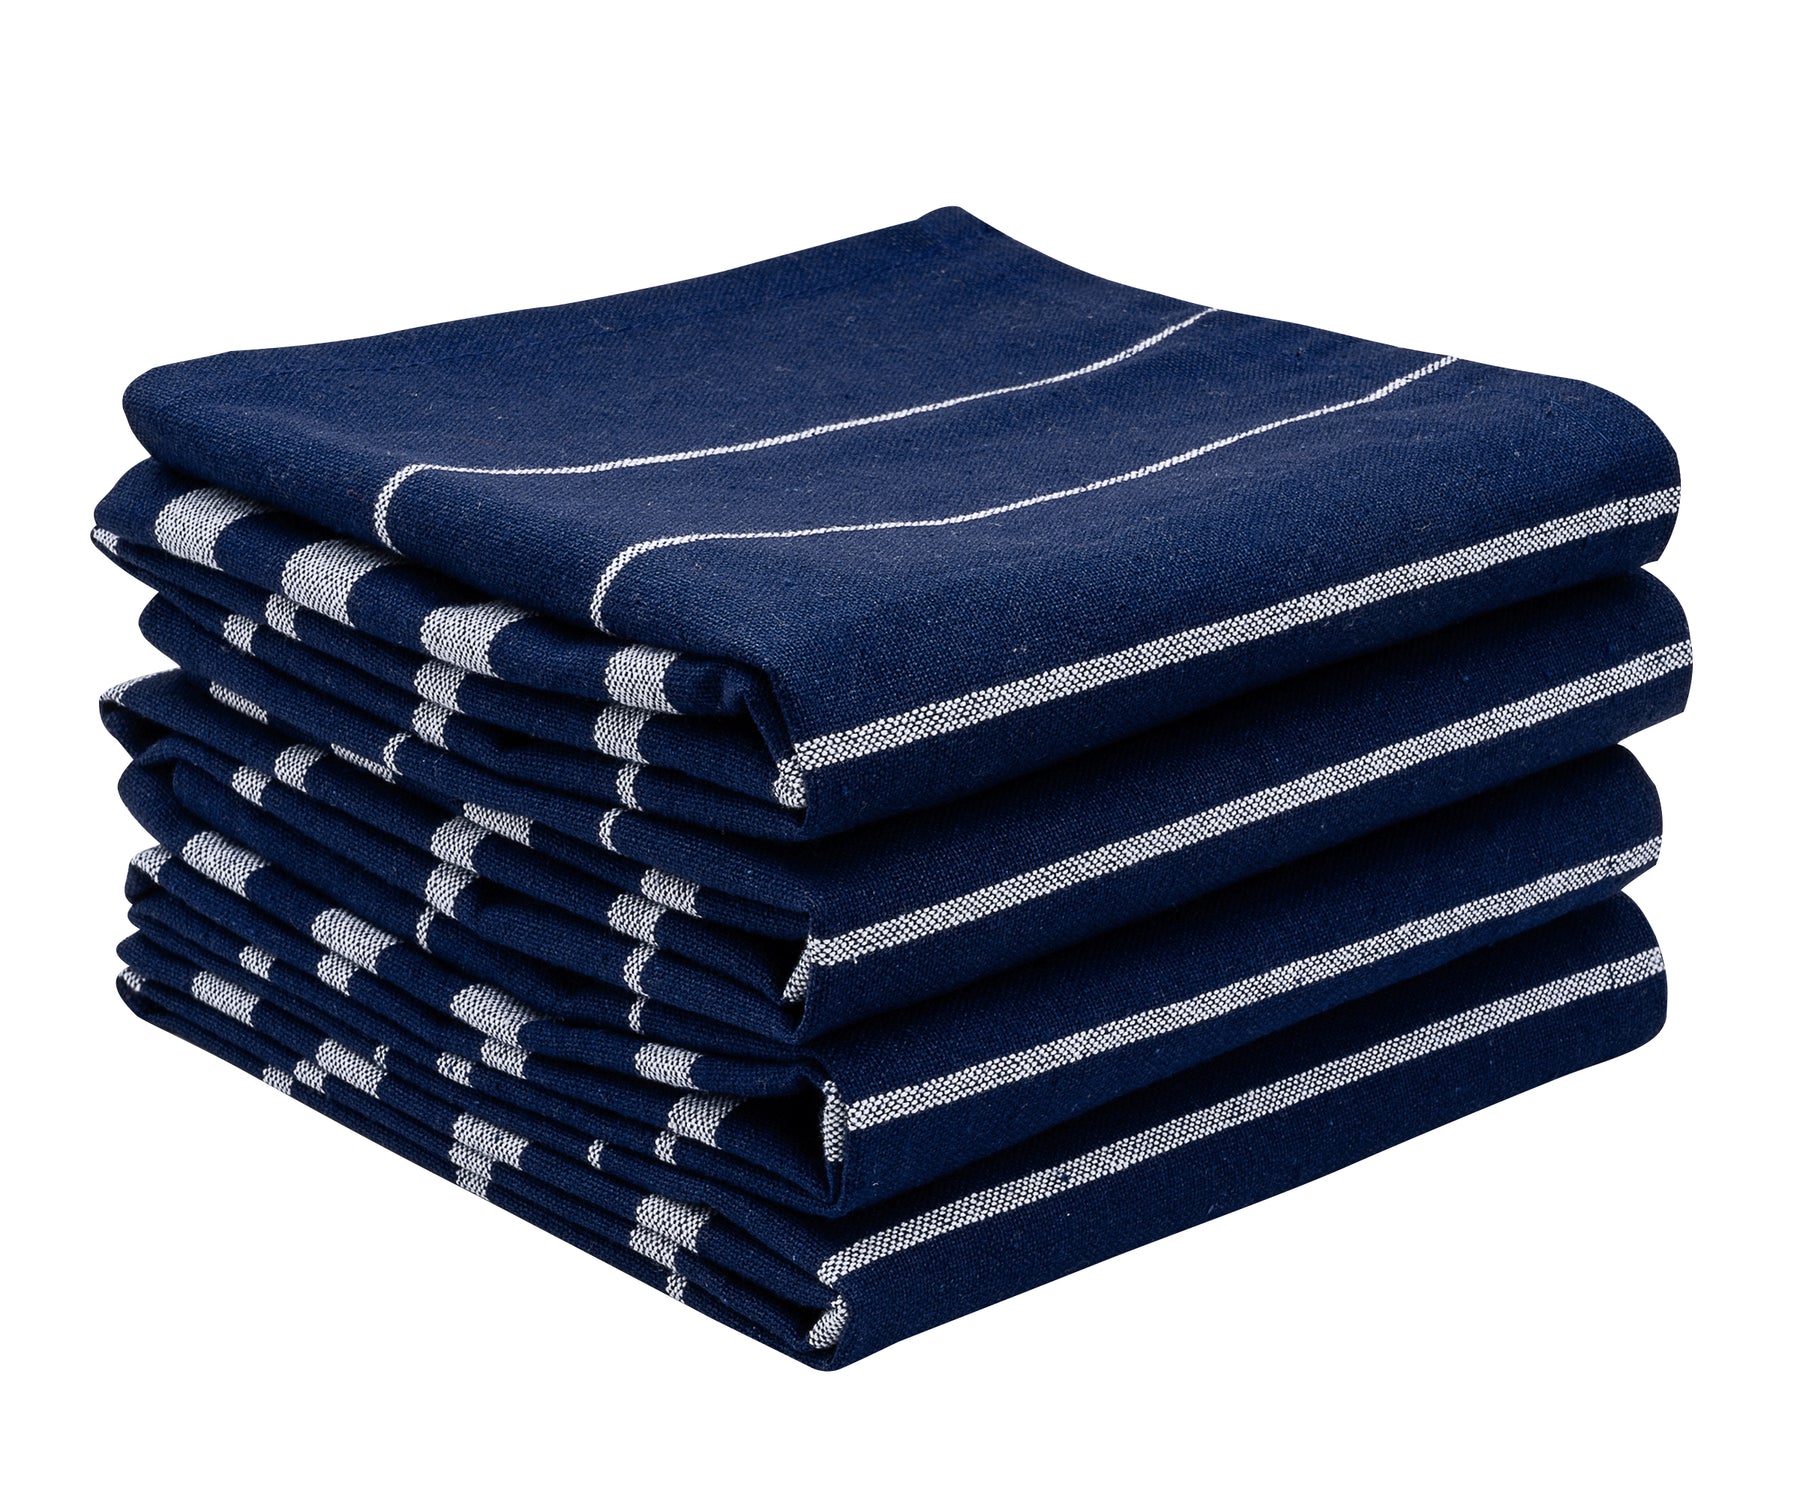 Cotton kitchen towels for everyday use.